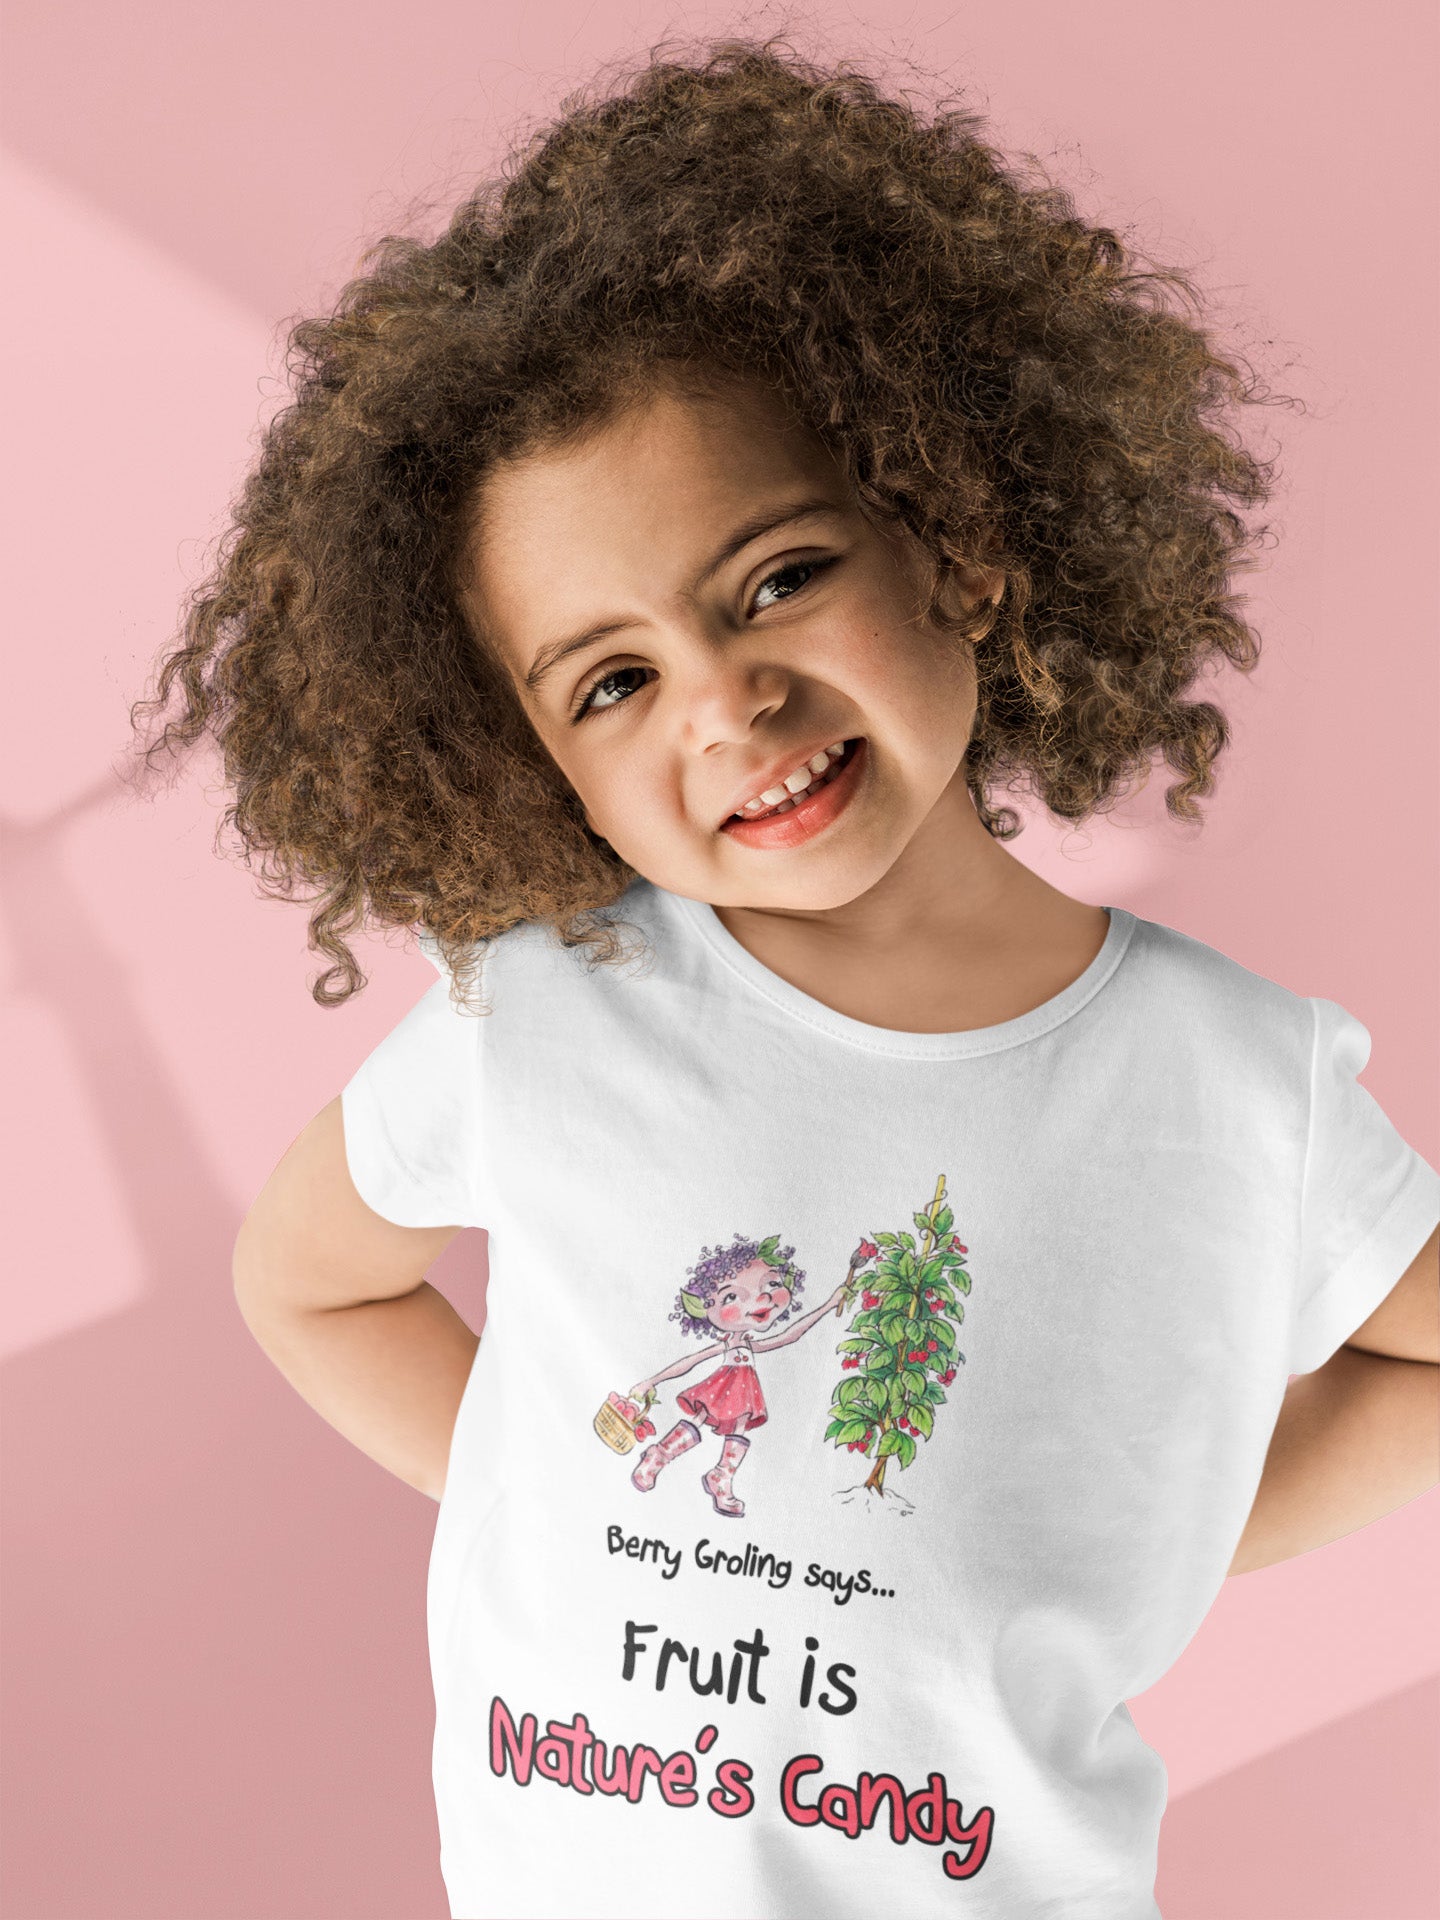 A white official Grolings kids' t-shirt, featuring the phrase 'Berry Groling says... Fruit is Nature’s Candy'. The t-shirt showcases Berry Groling, painting sweetness into raspberries on a bush. Berry Groling is holding a basket filled with fresh raspberries, capturing the abundance and delectable sweetness of nature's bounty. The scene encourages the wearer to appreciate and enjoy the natural delights provided by the Earth. Worn by a young girl smiling and standing in front of a pink background.